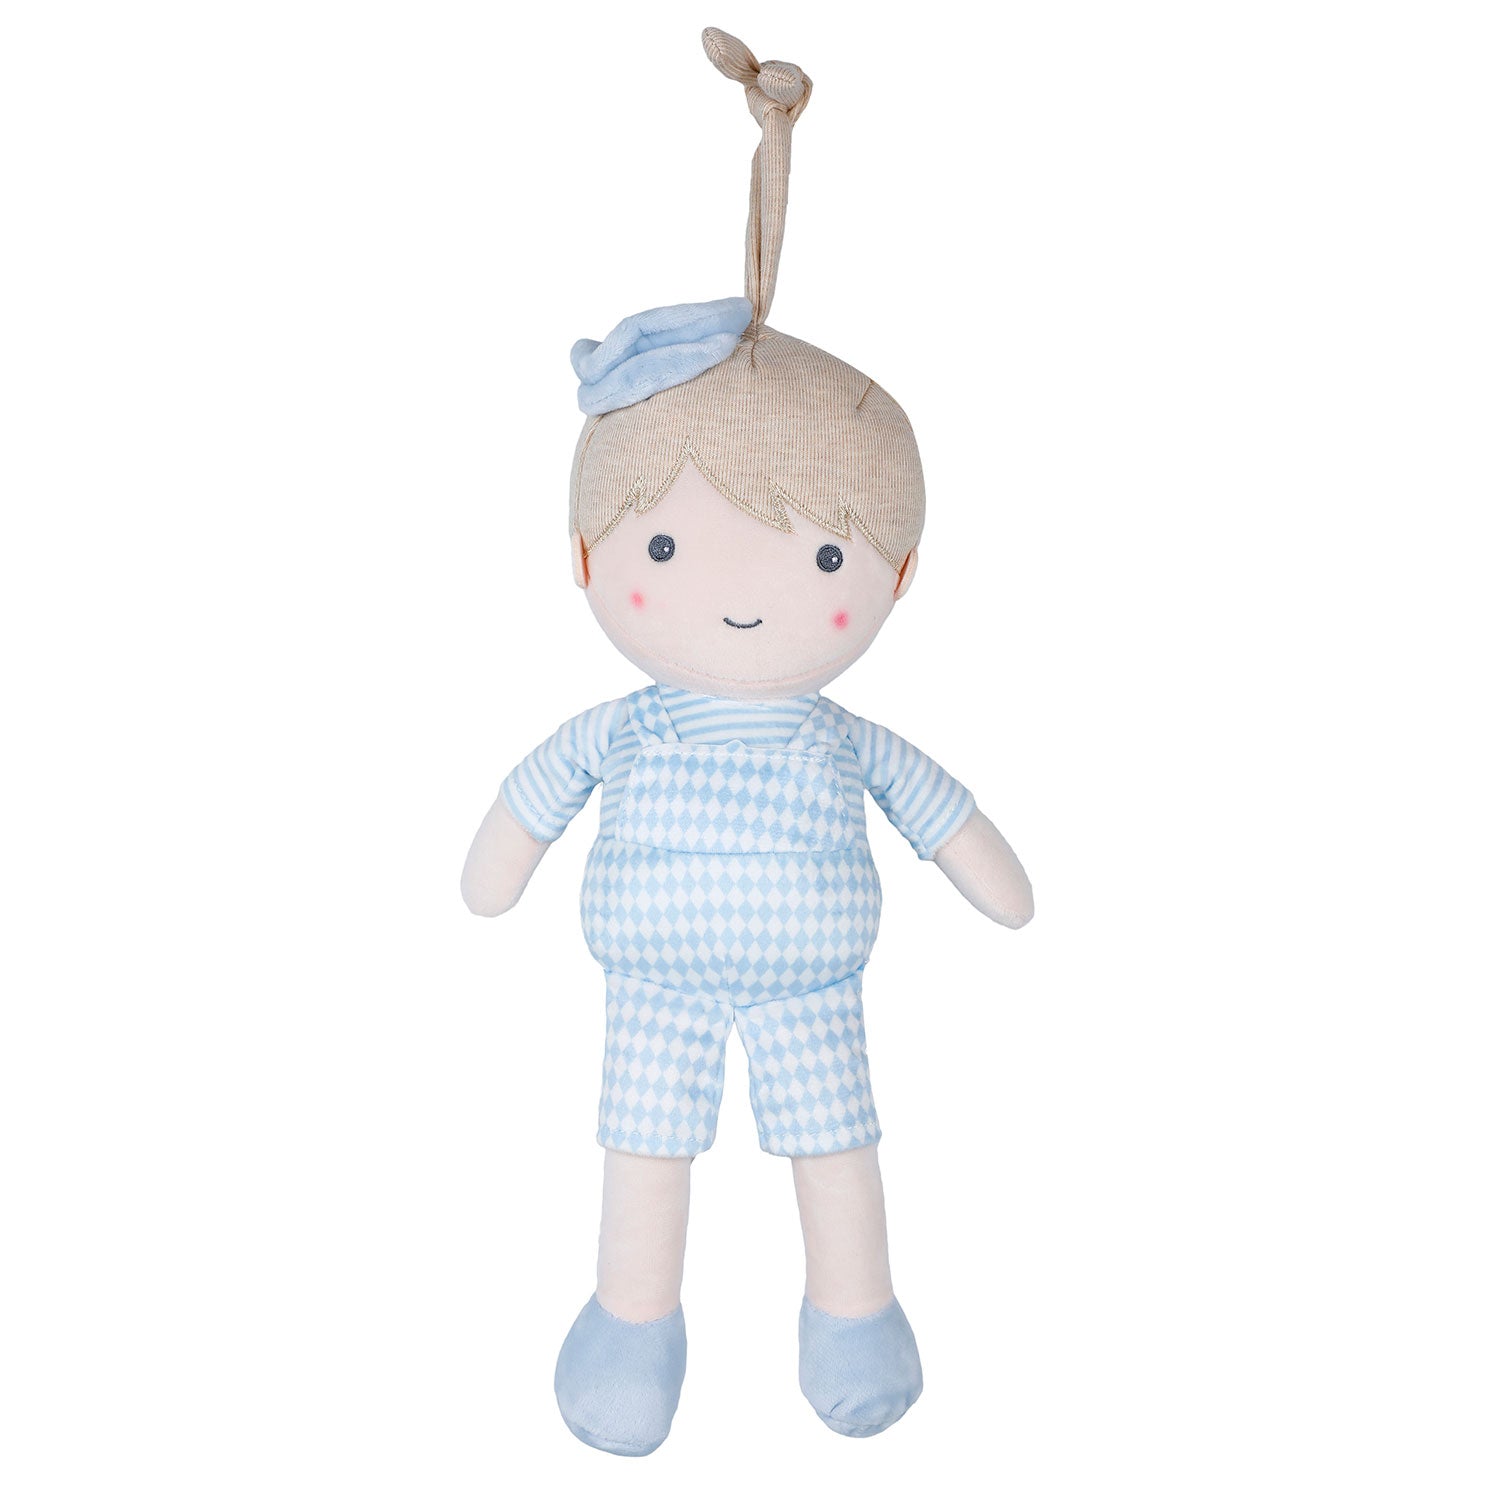 Baby Moo Little Boy Hanging Musical Pulling Toy - Blue